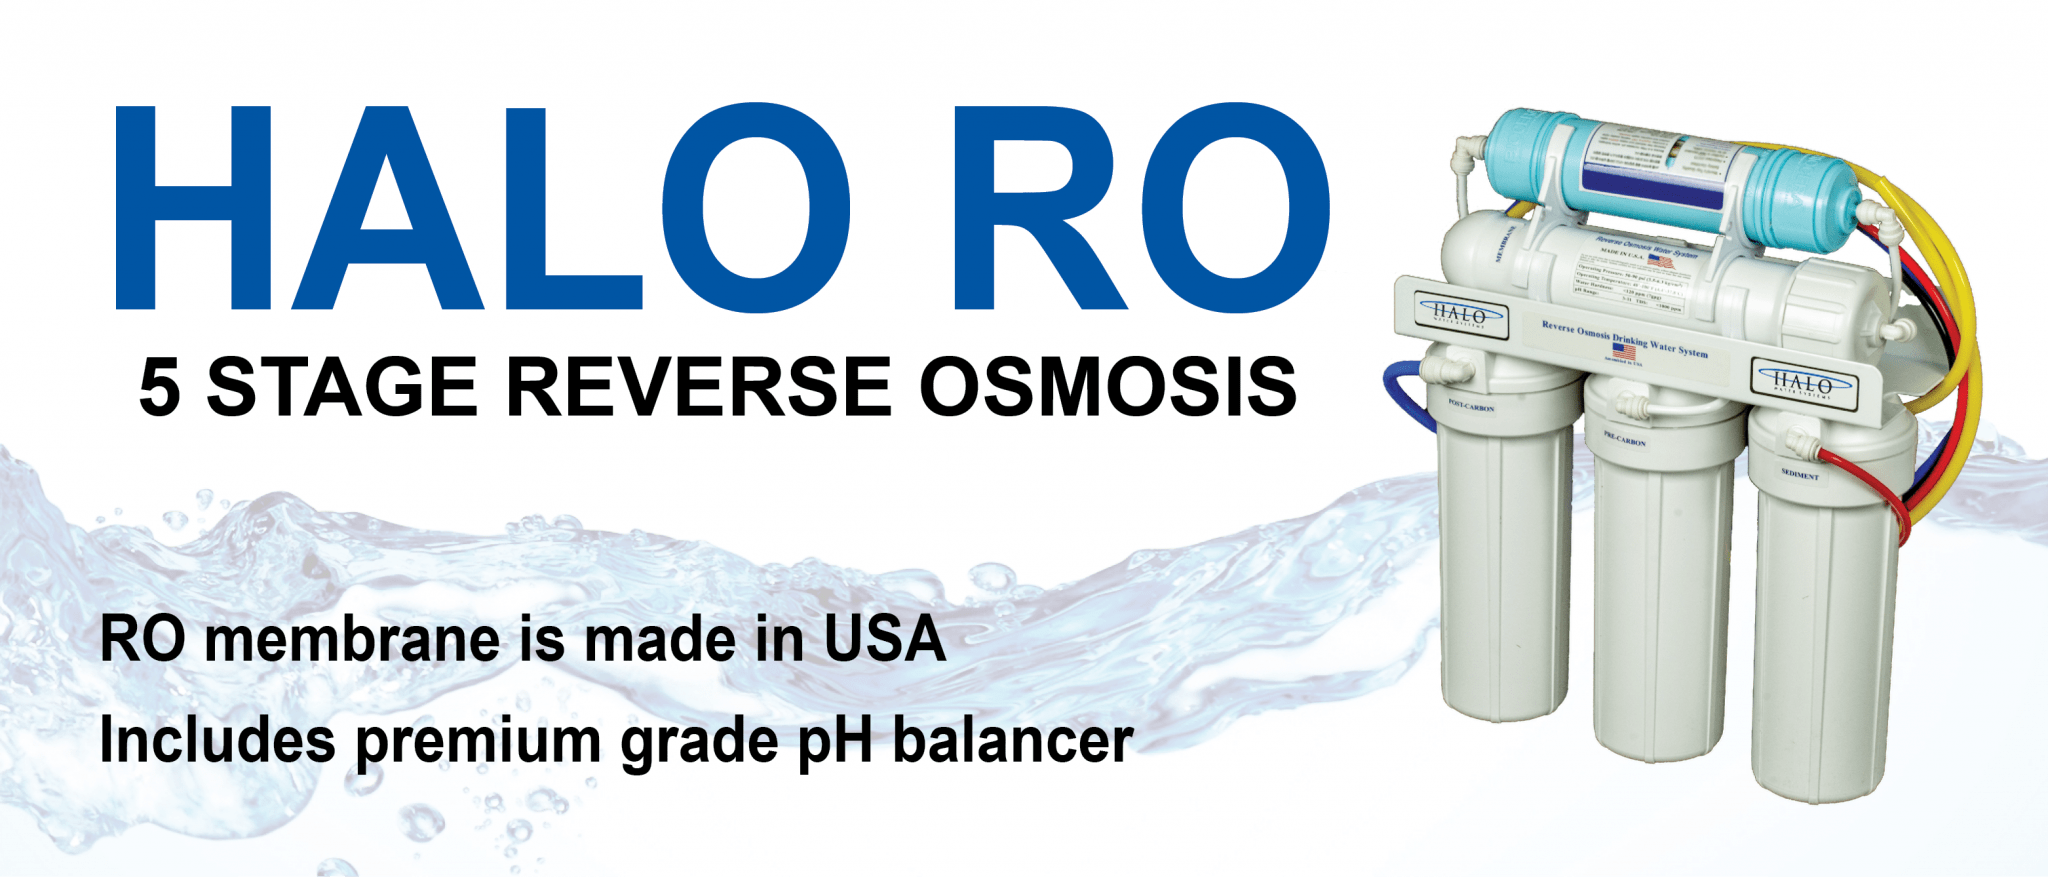 5 Stage Reverse Osmosis Water Treatment System